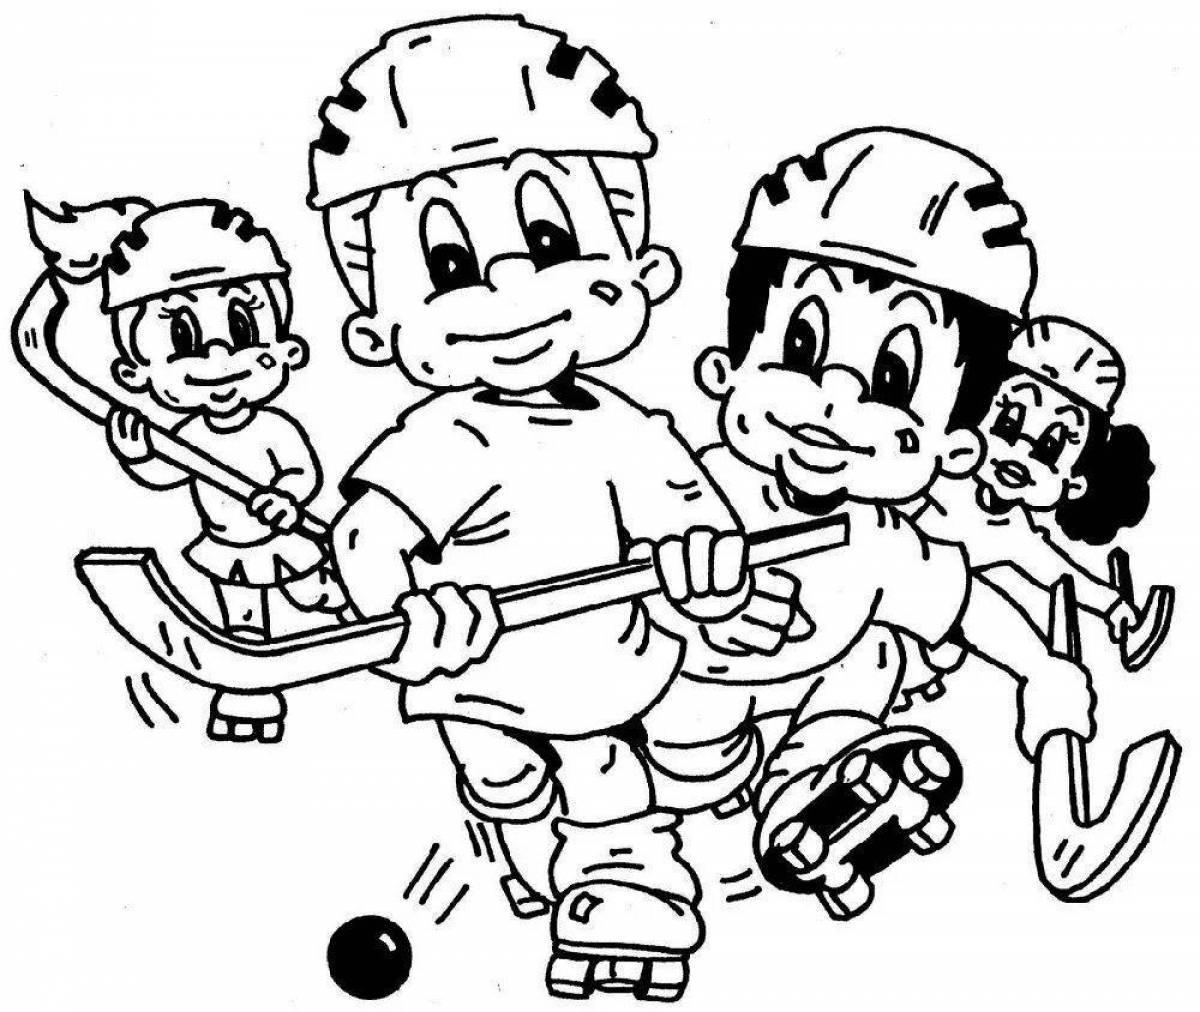 Fun sports coloring book for kids